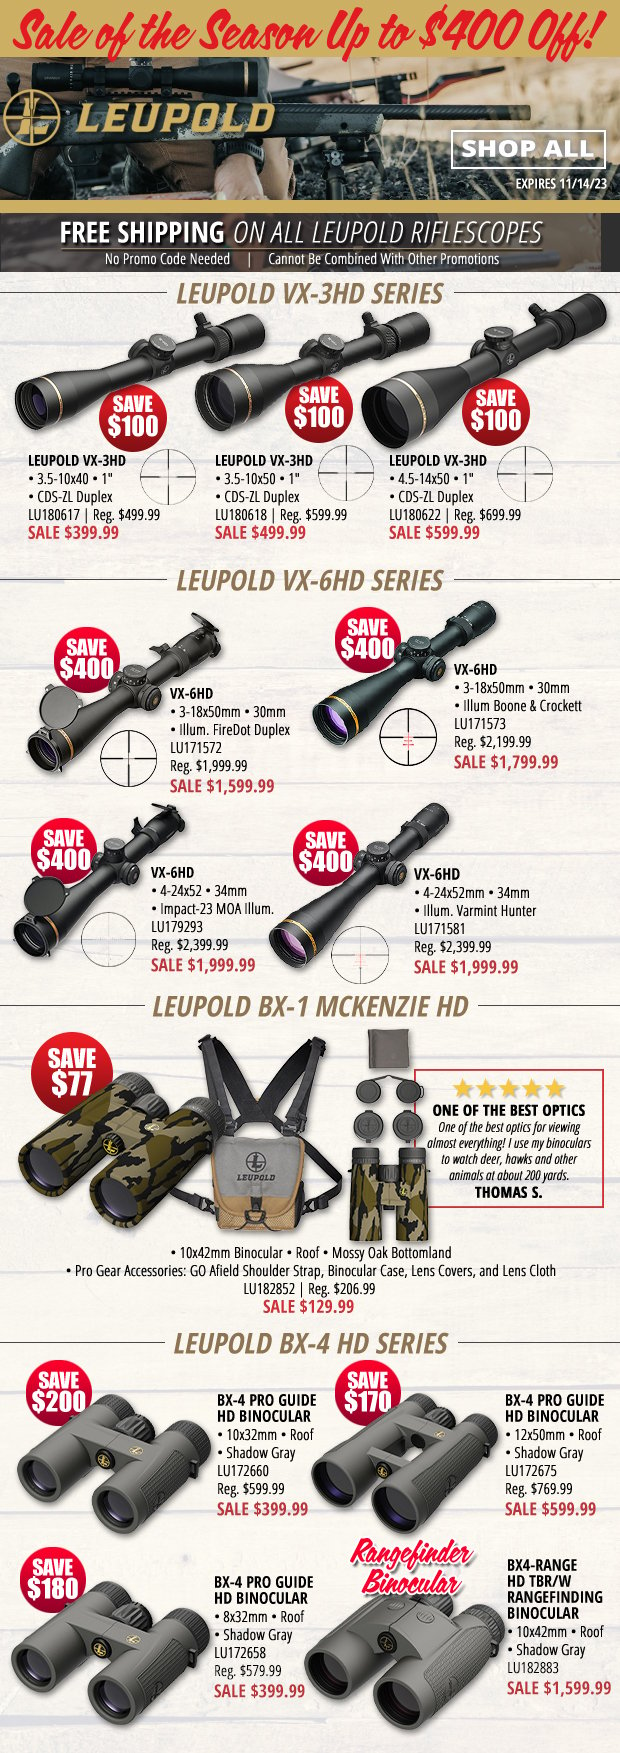 Leupold Sale of the Season up to $400 Off